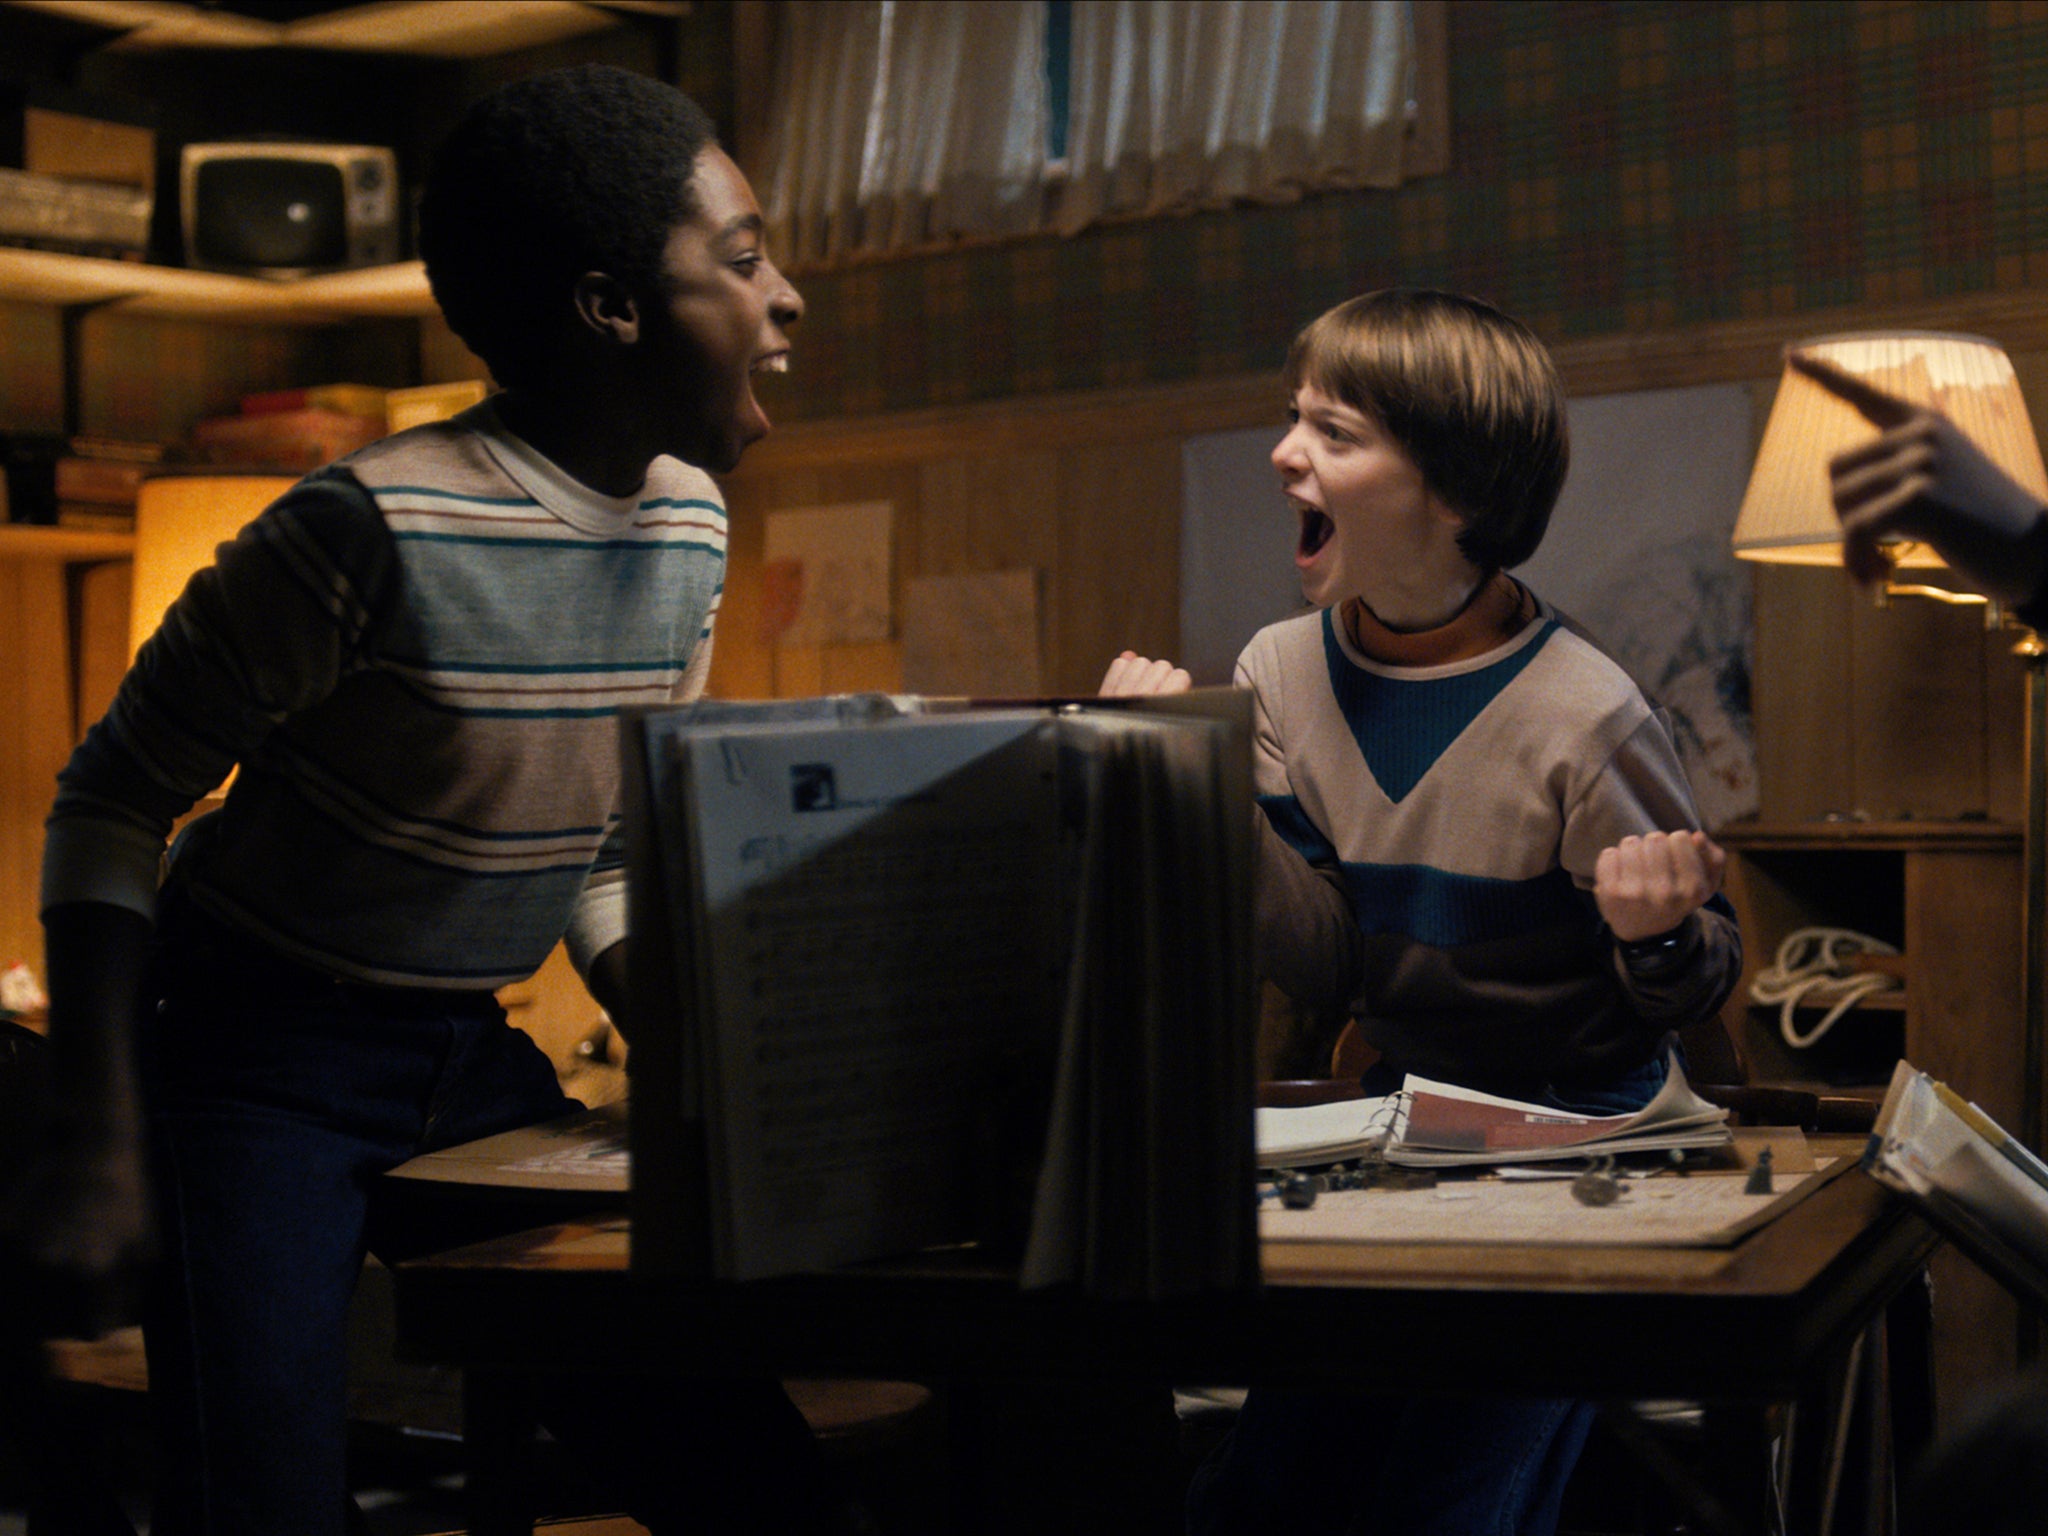 Central to the magic of ‘Stranger Things’ is the fantasy tabletop game Dungeons & Dragons